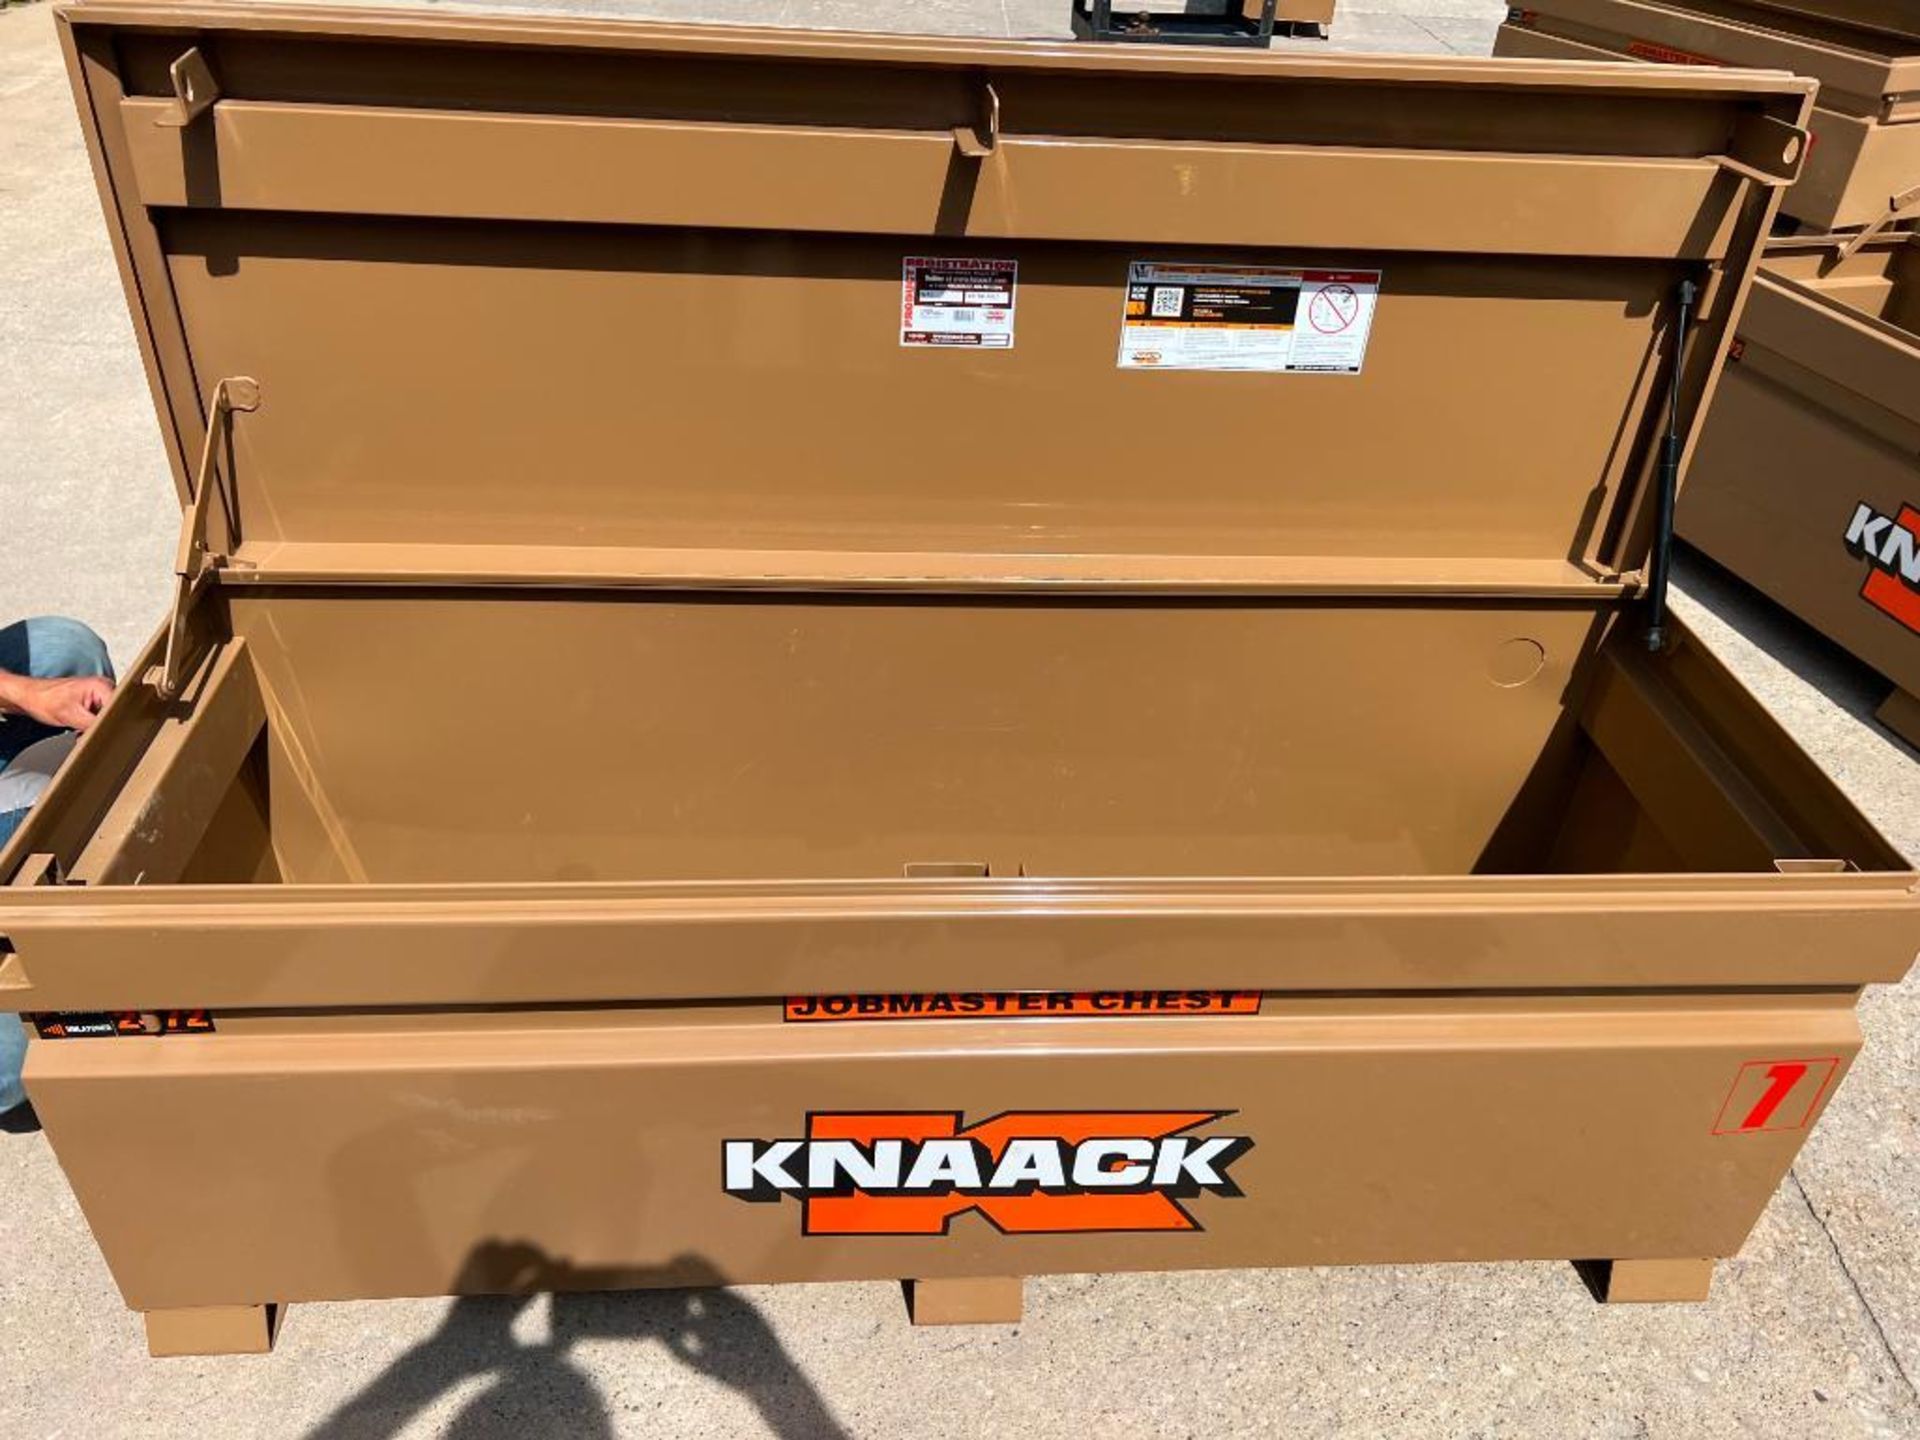 Knaack Jobmaster Chest, Model #2472, Serial #2211017527. Located in Mt. Pleasant, IA - Image 3 of 3